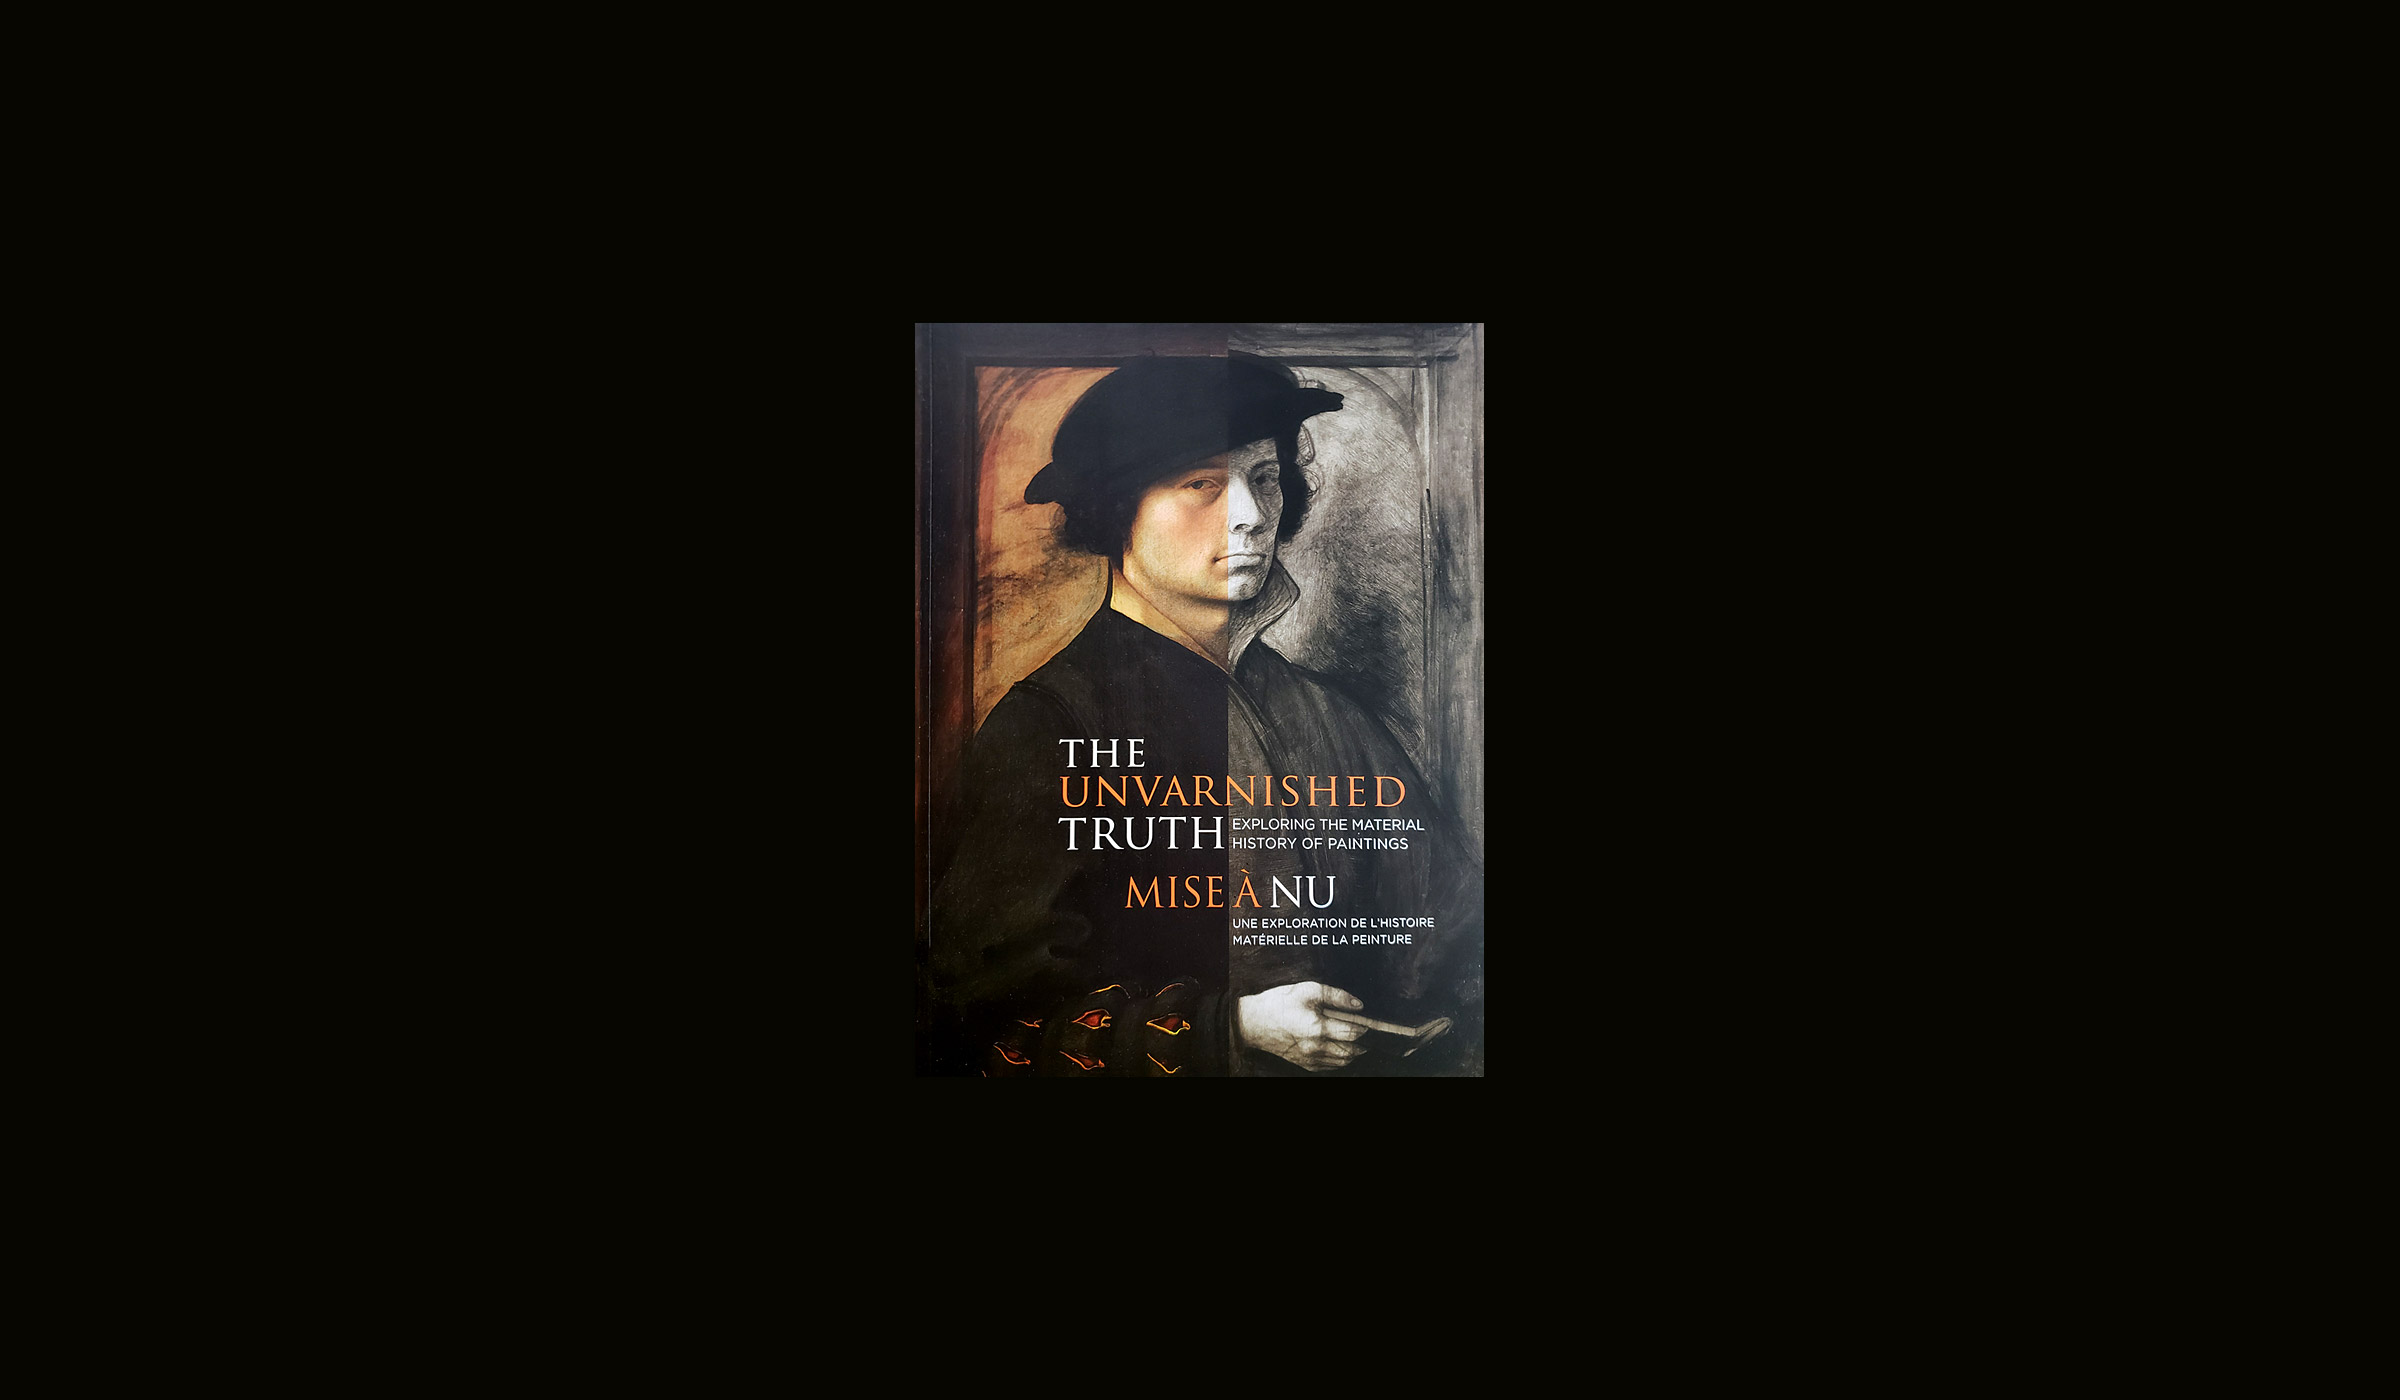 Book cover with portrait of man wearing a hat